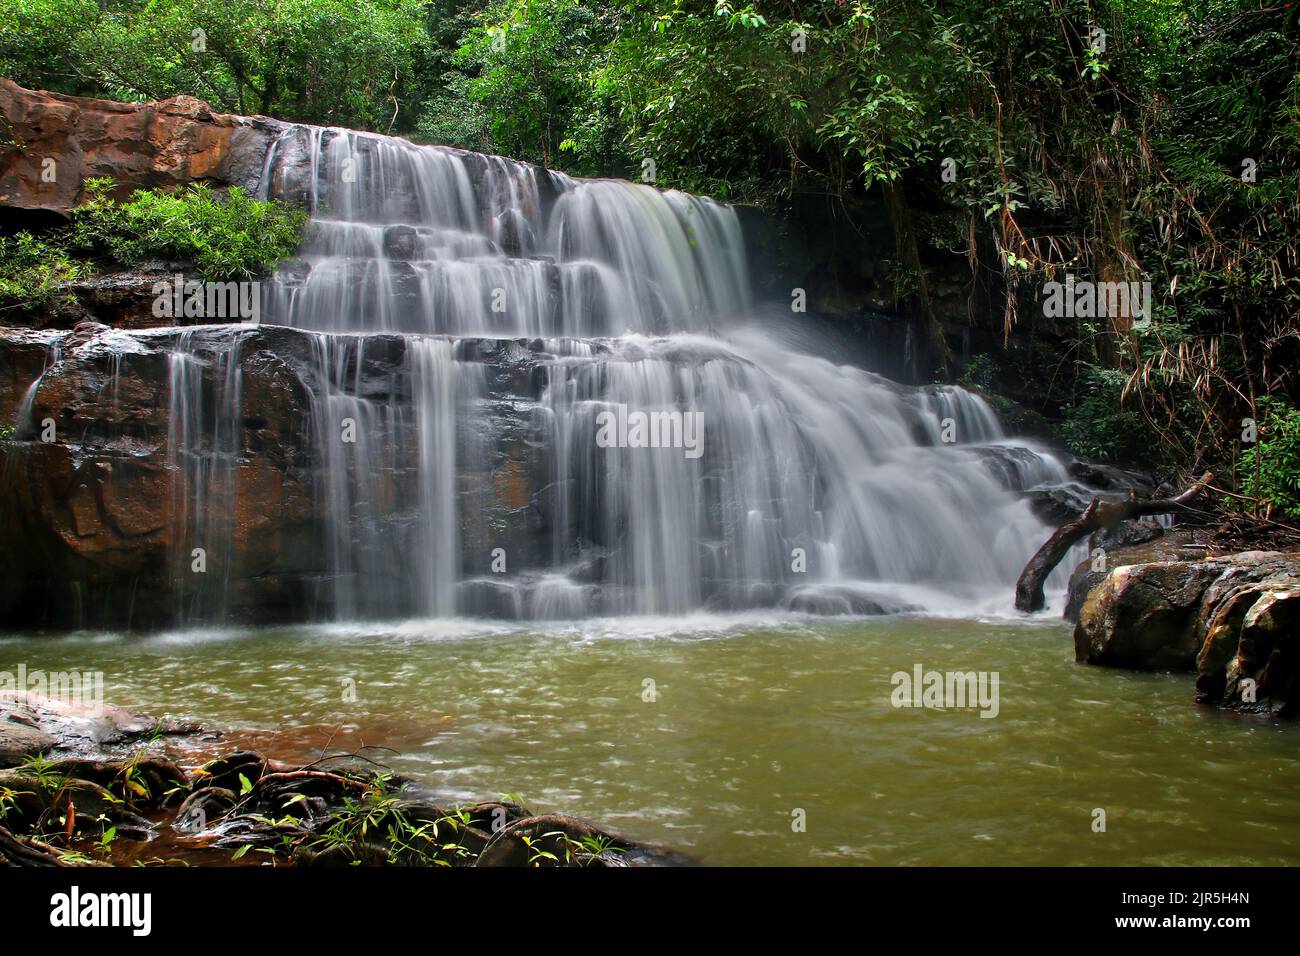 landscape photo, beautiful waterfall in green forest Stock Photo